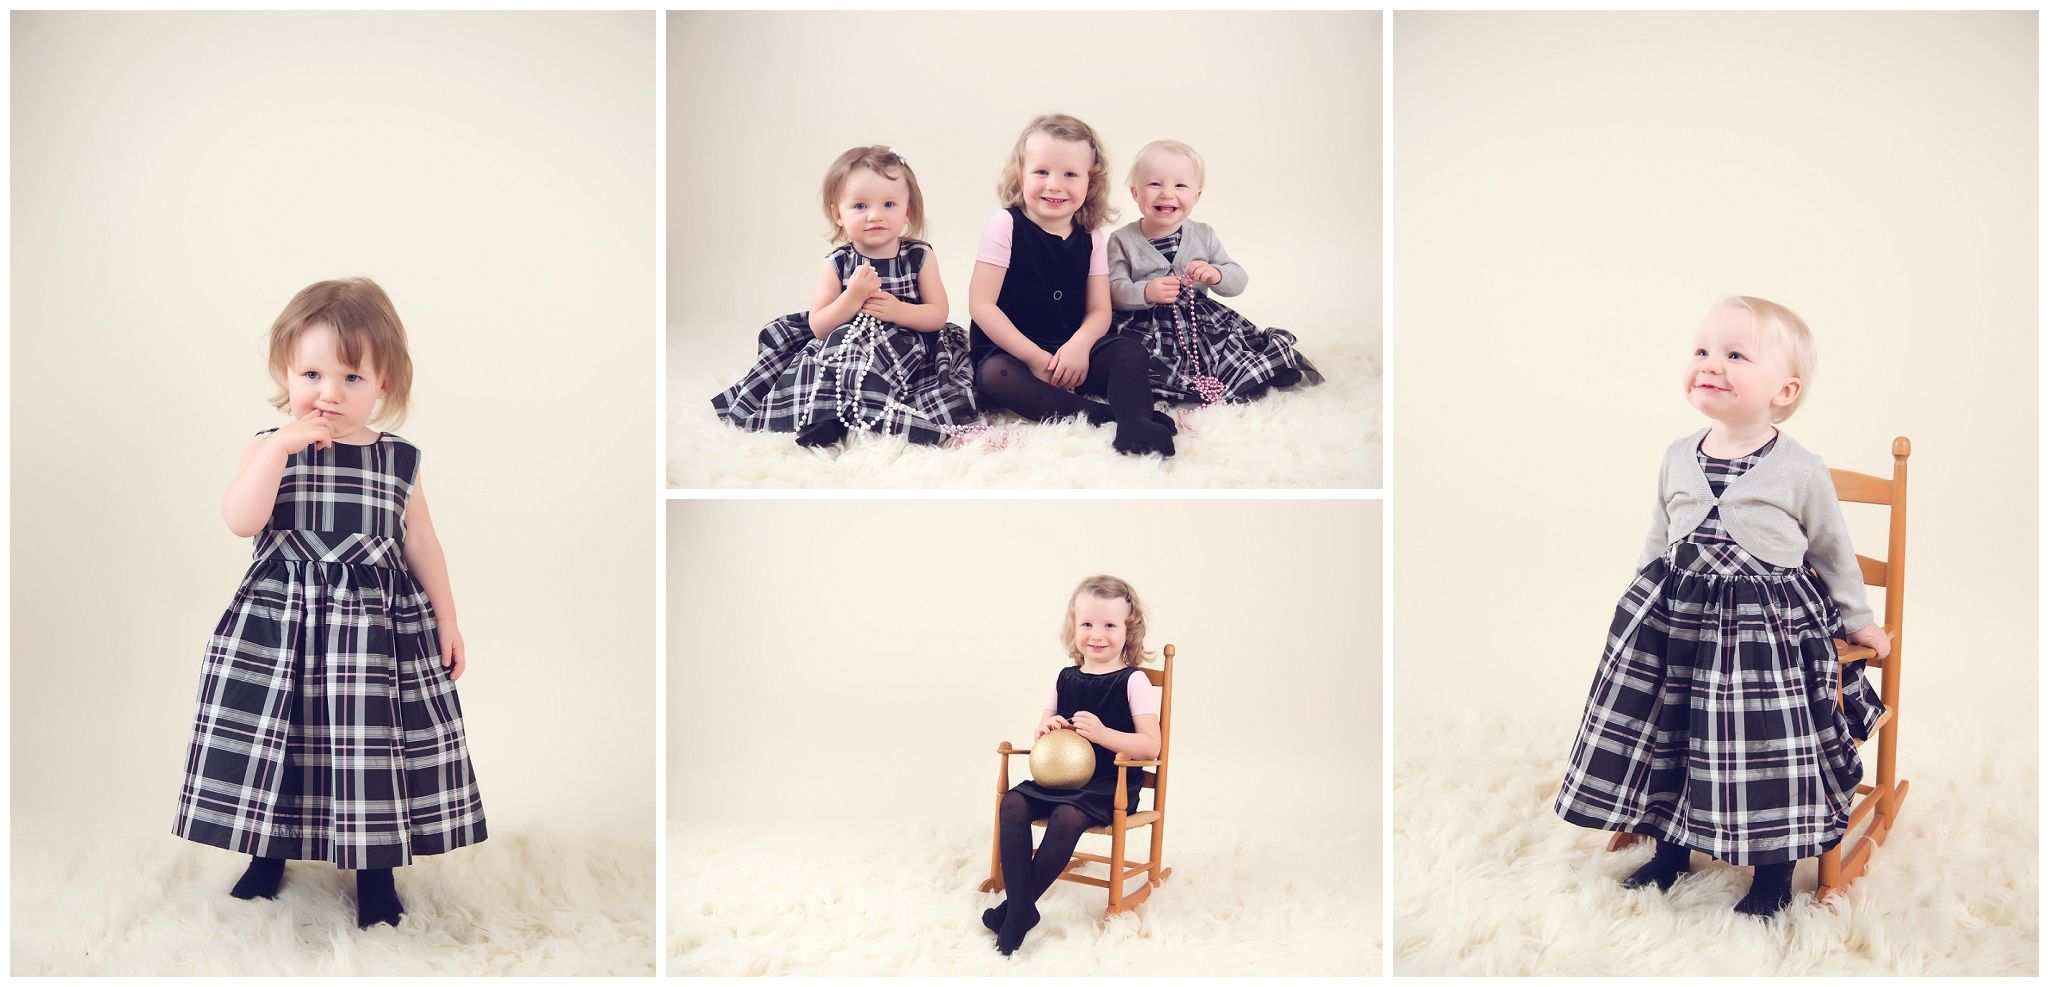 Ottawa Child and Family Photographer | Christmas Mini Sessions Part Two